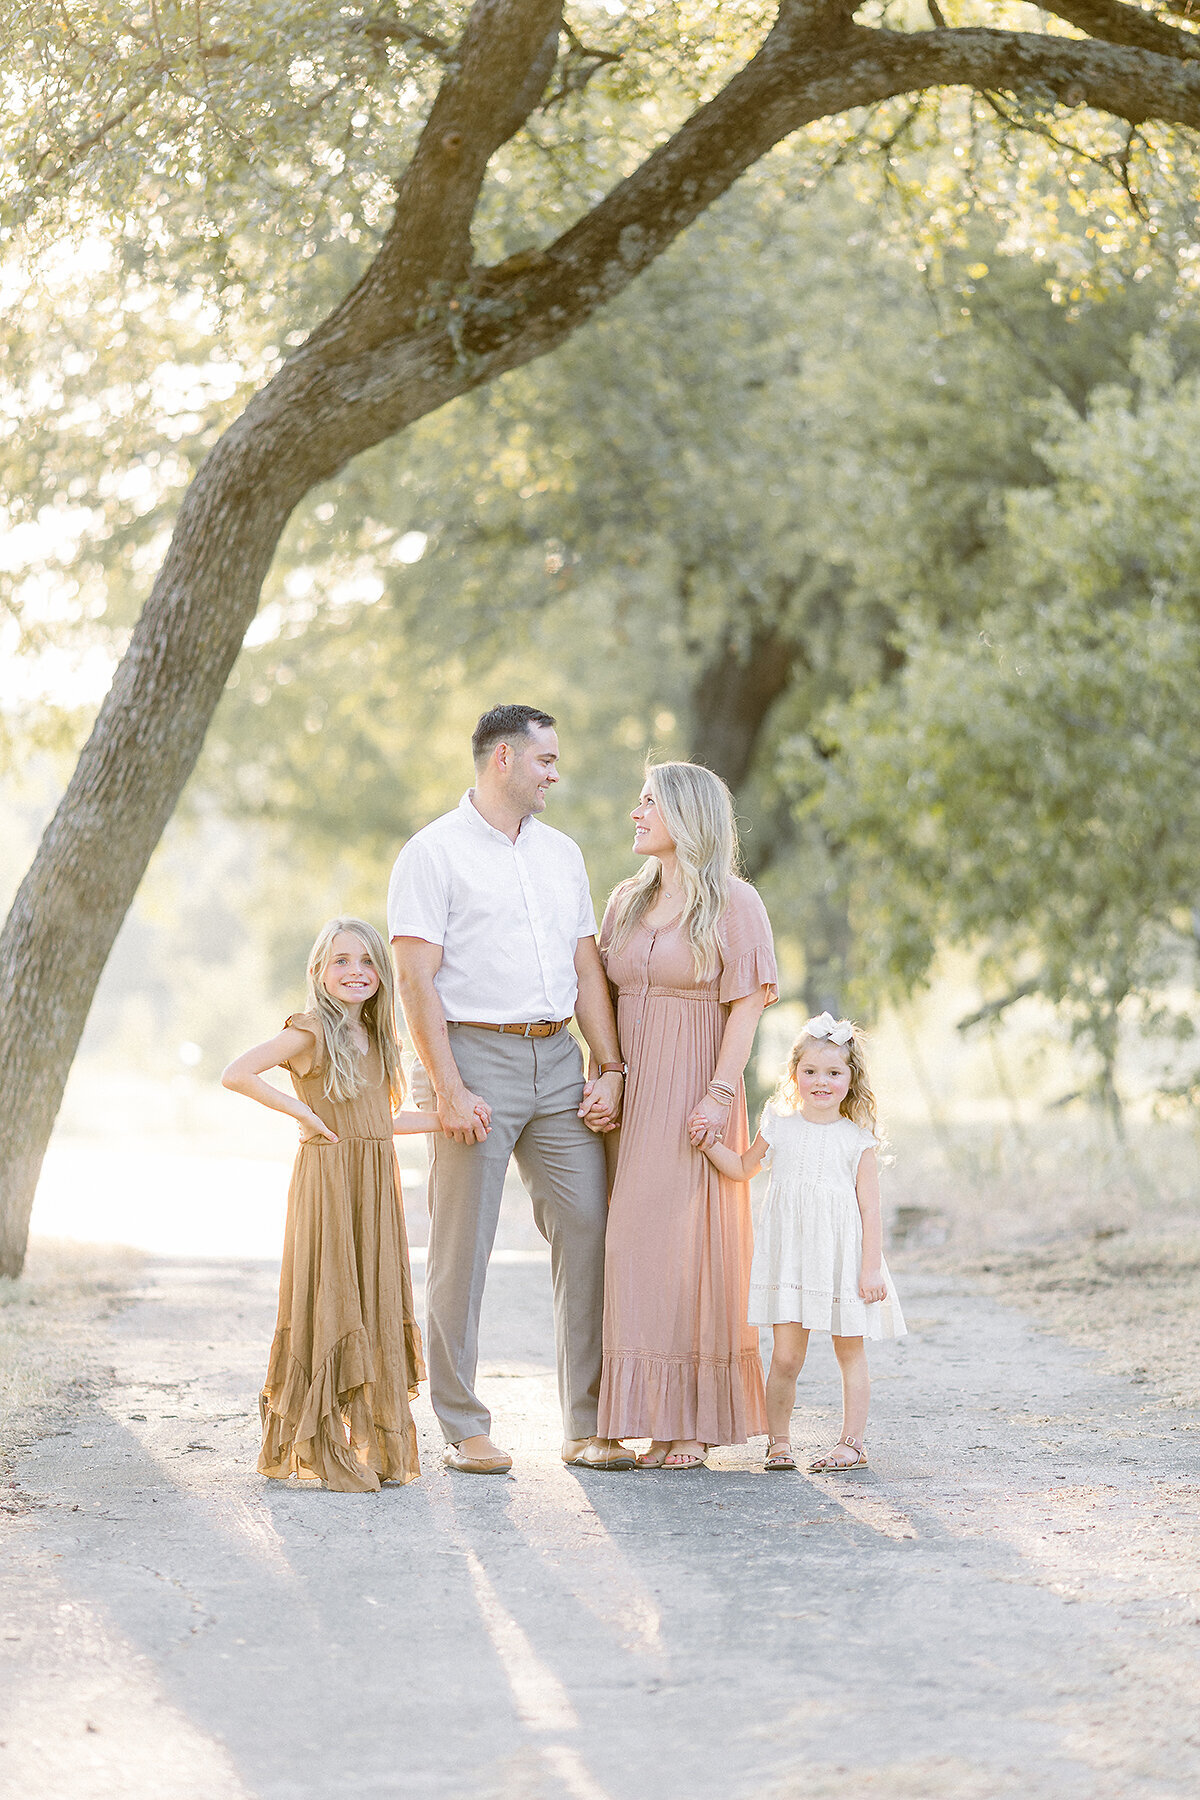 A young family of 4 portrait taken while they are all standing together in the middle of a path at a local Dallas/Fort Worth park as they look at each other while their family photographer captures this sweet moment.